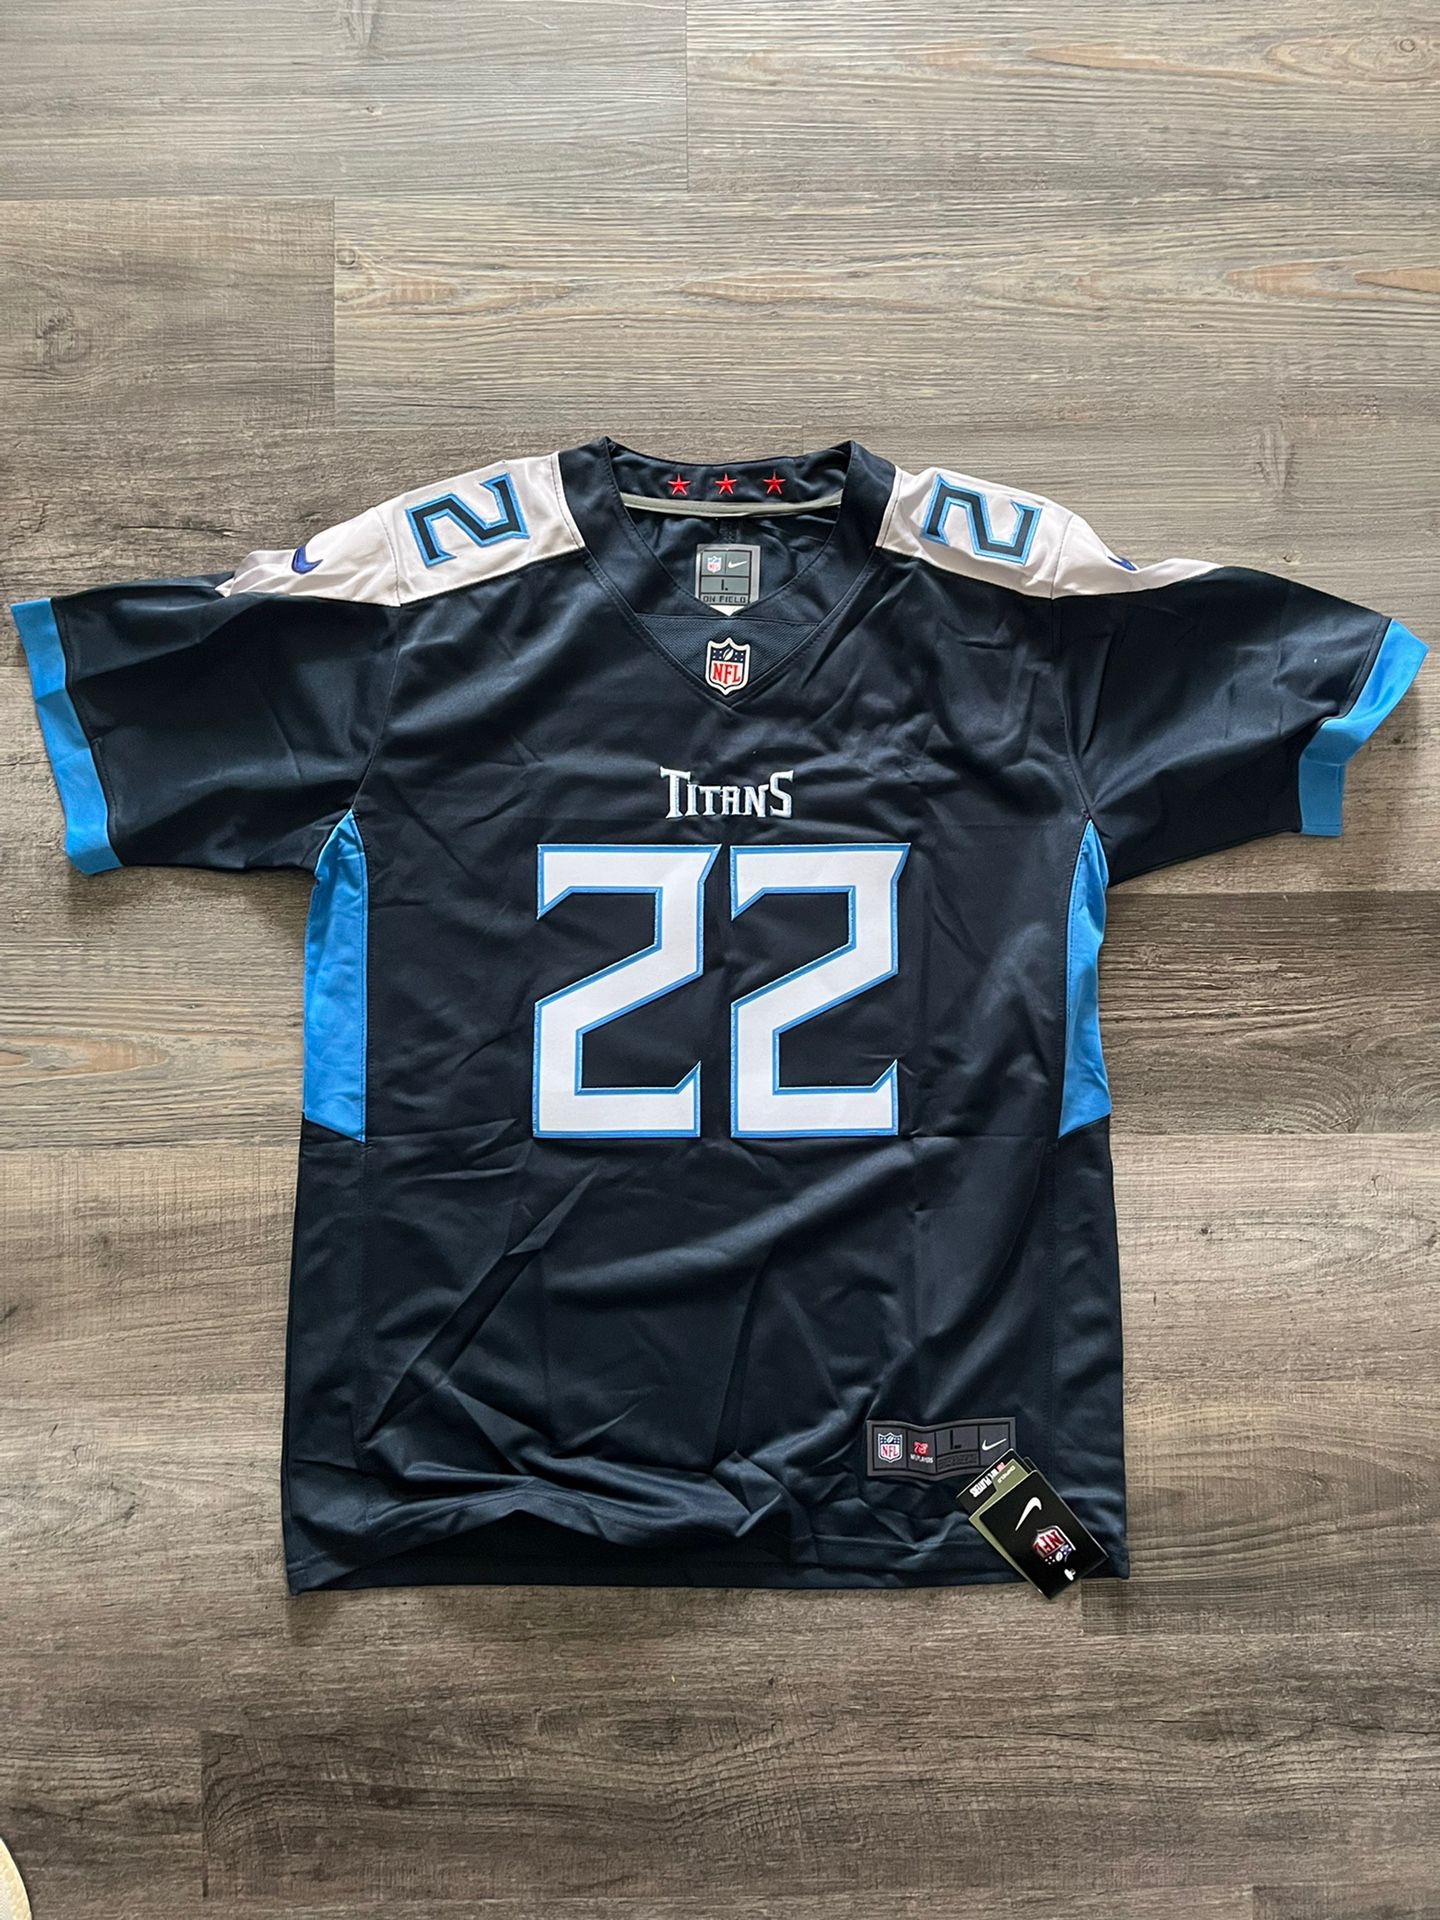 TENNESSEE TITANS DERRICK HENRY STITCHED JERSEY ADULT L